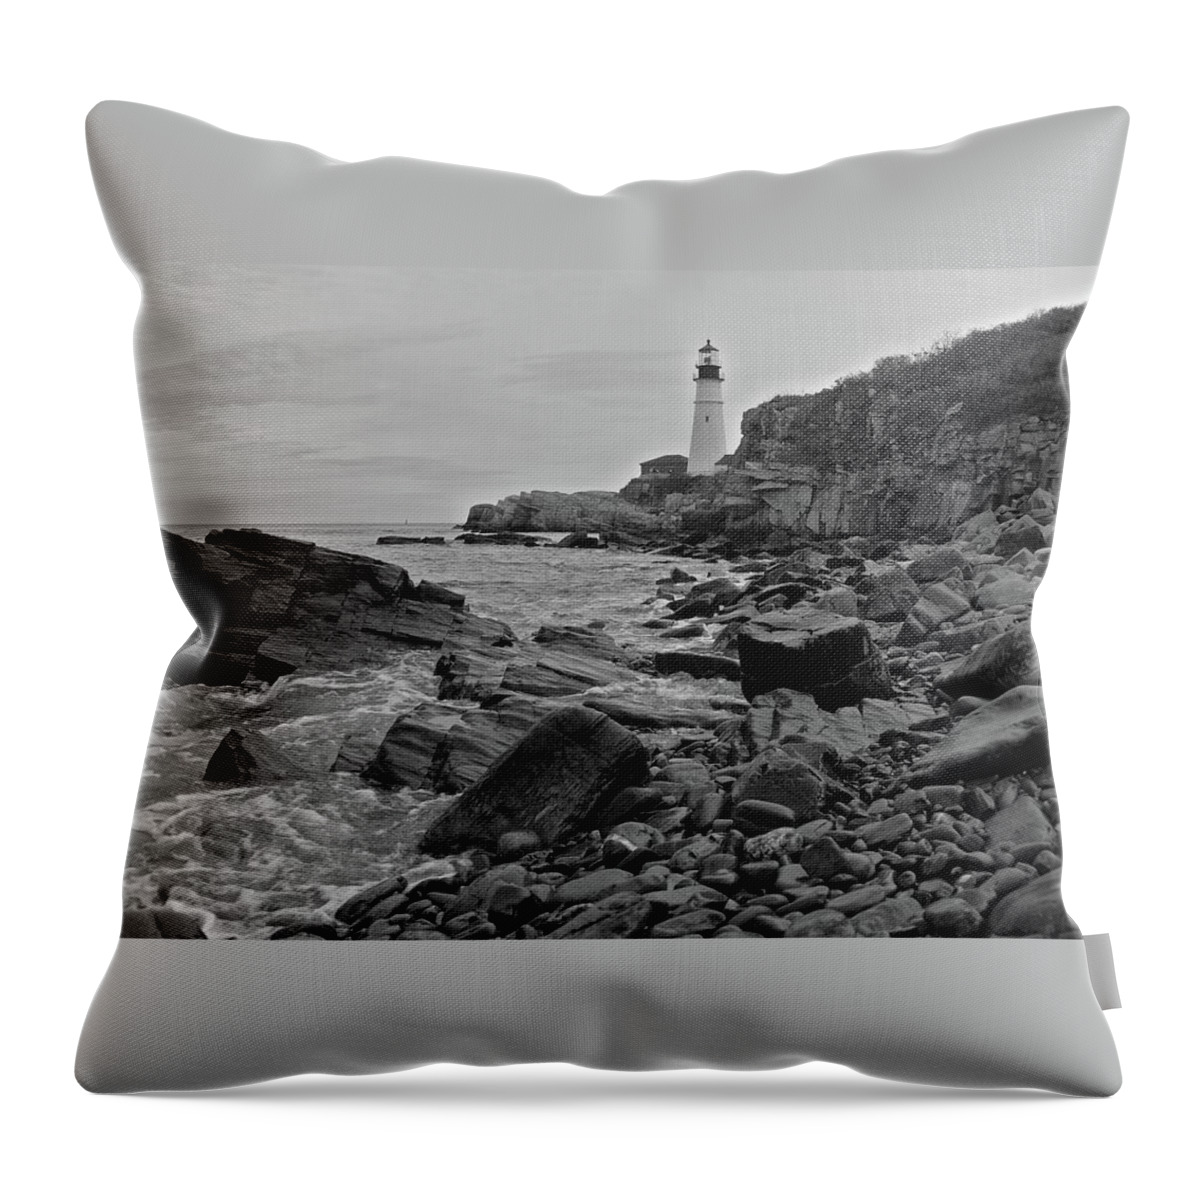 Maine Throw Pillow featuring the photograph Maine shore by Dmdcreative Photography